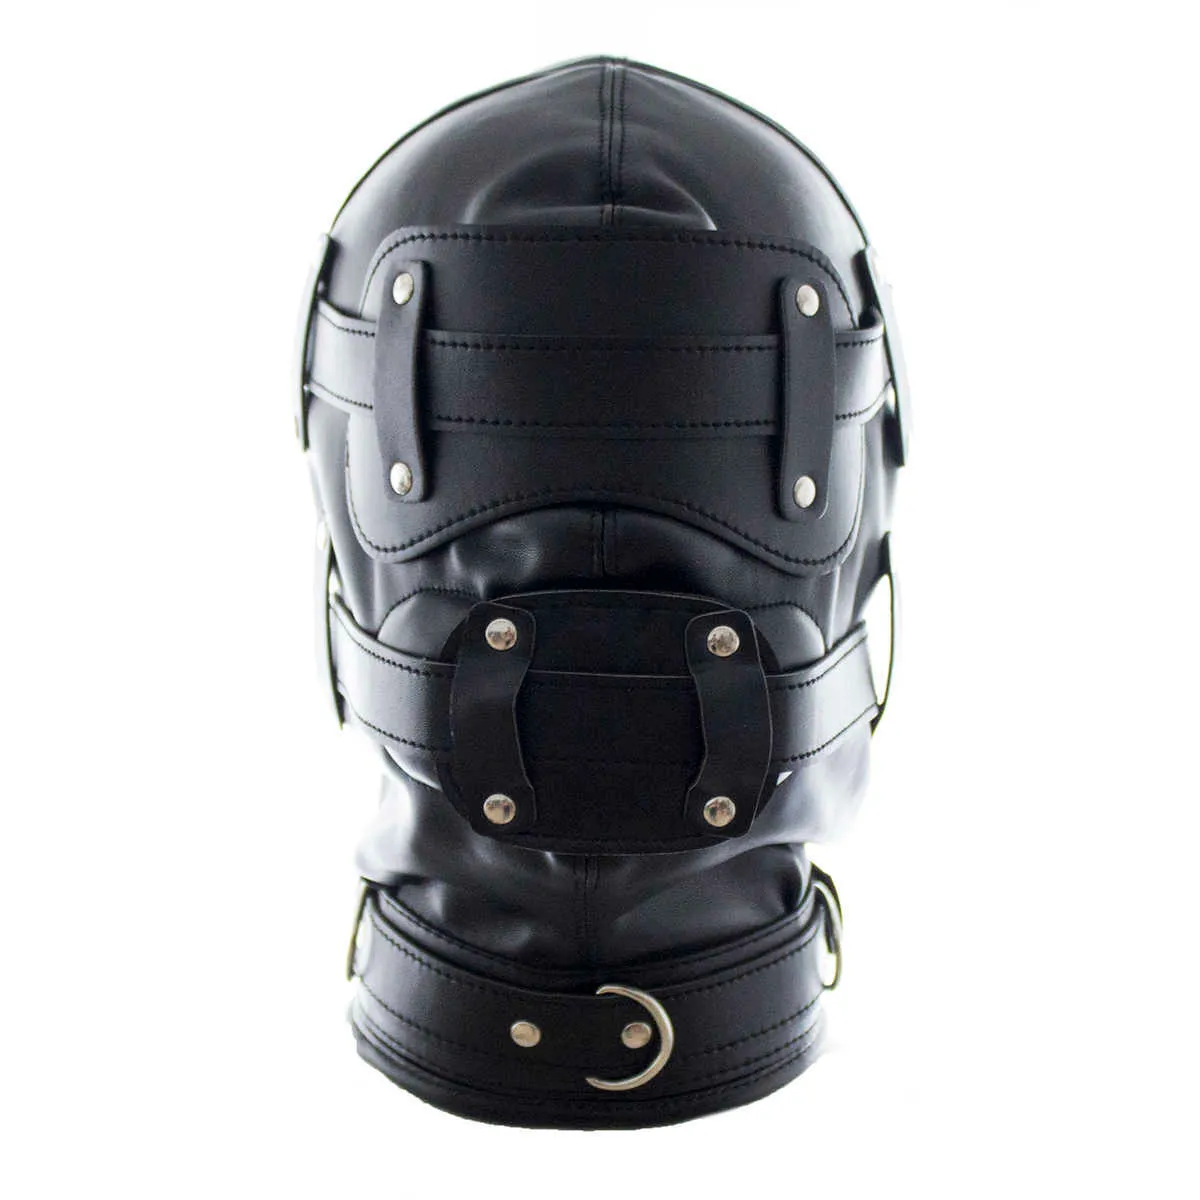 Beauty Items Faux Leather Bondage Restraint Sensory Deprivation Hood BDSM Mask With Penis Dildo Gag Adult Games sexy Toys For Couple